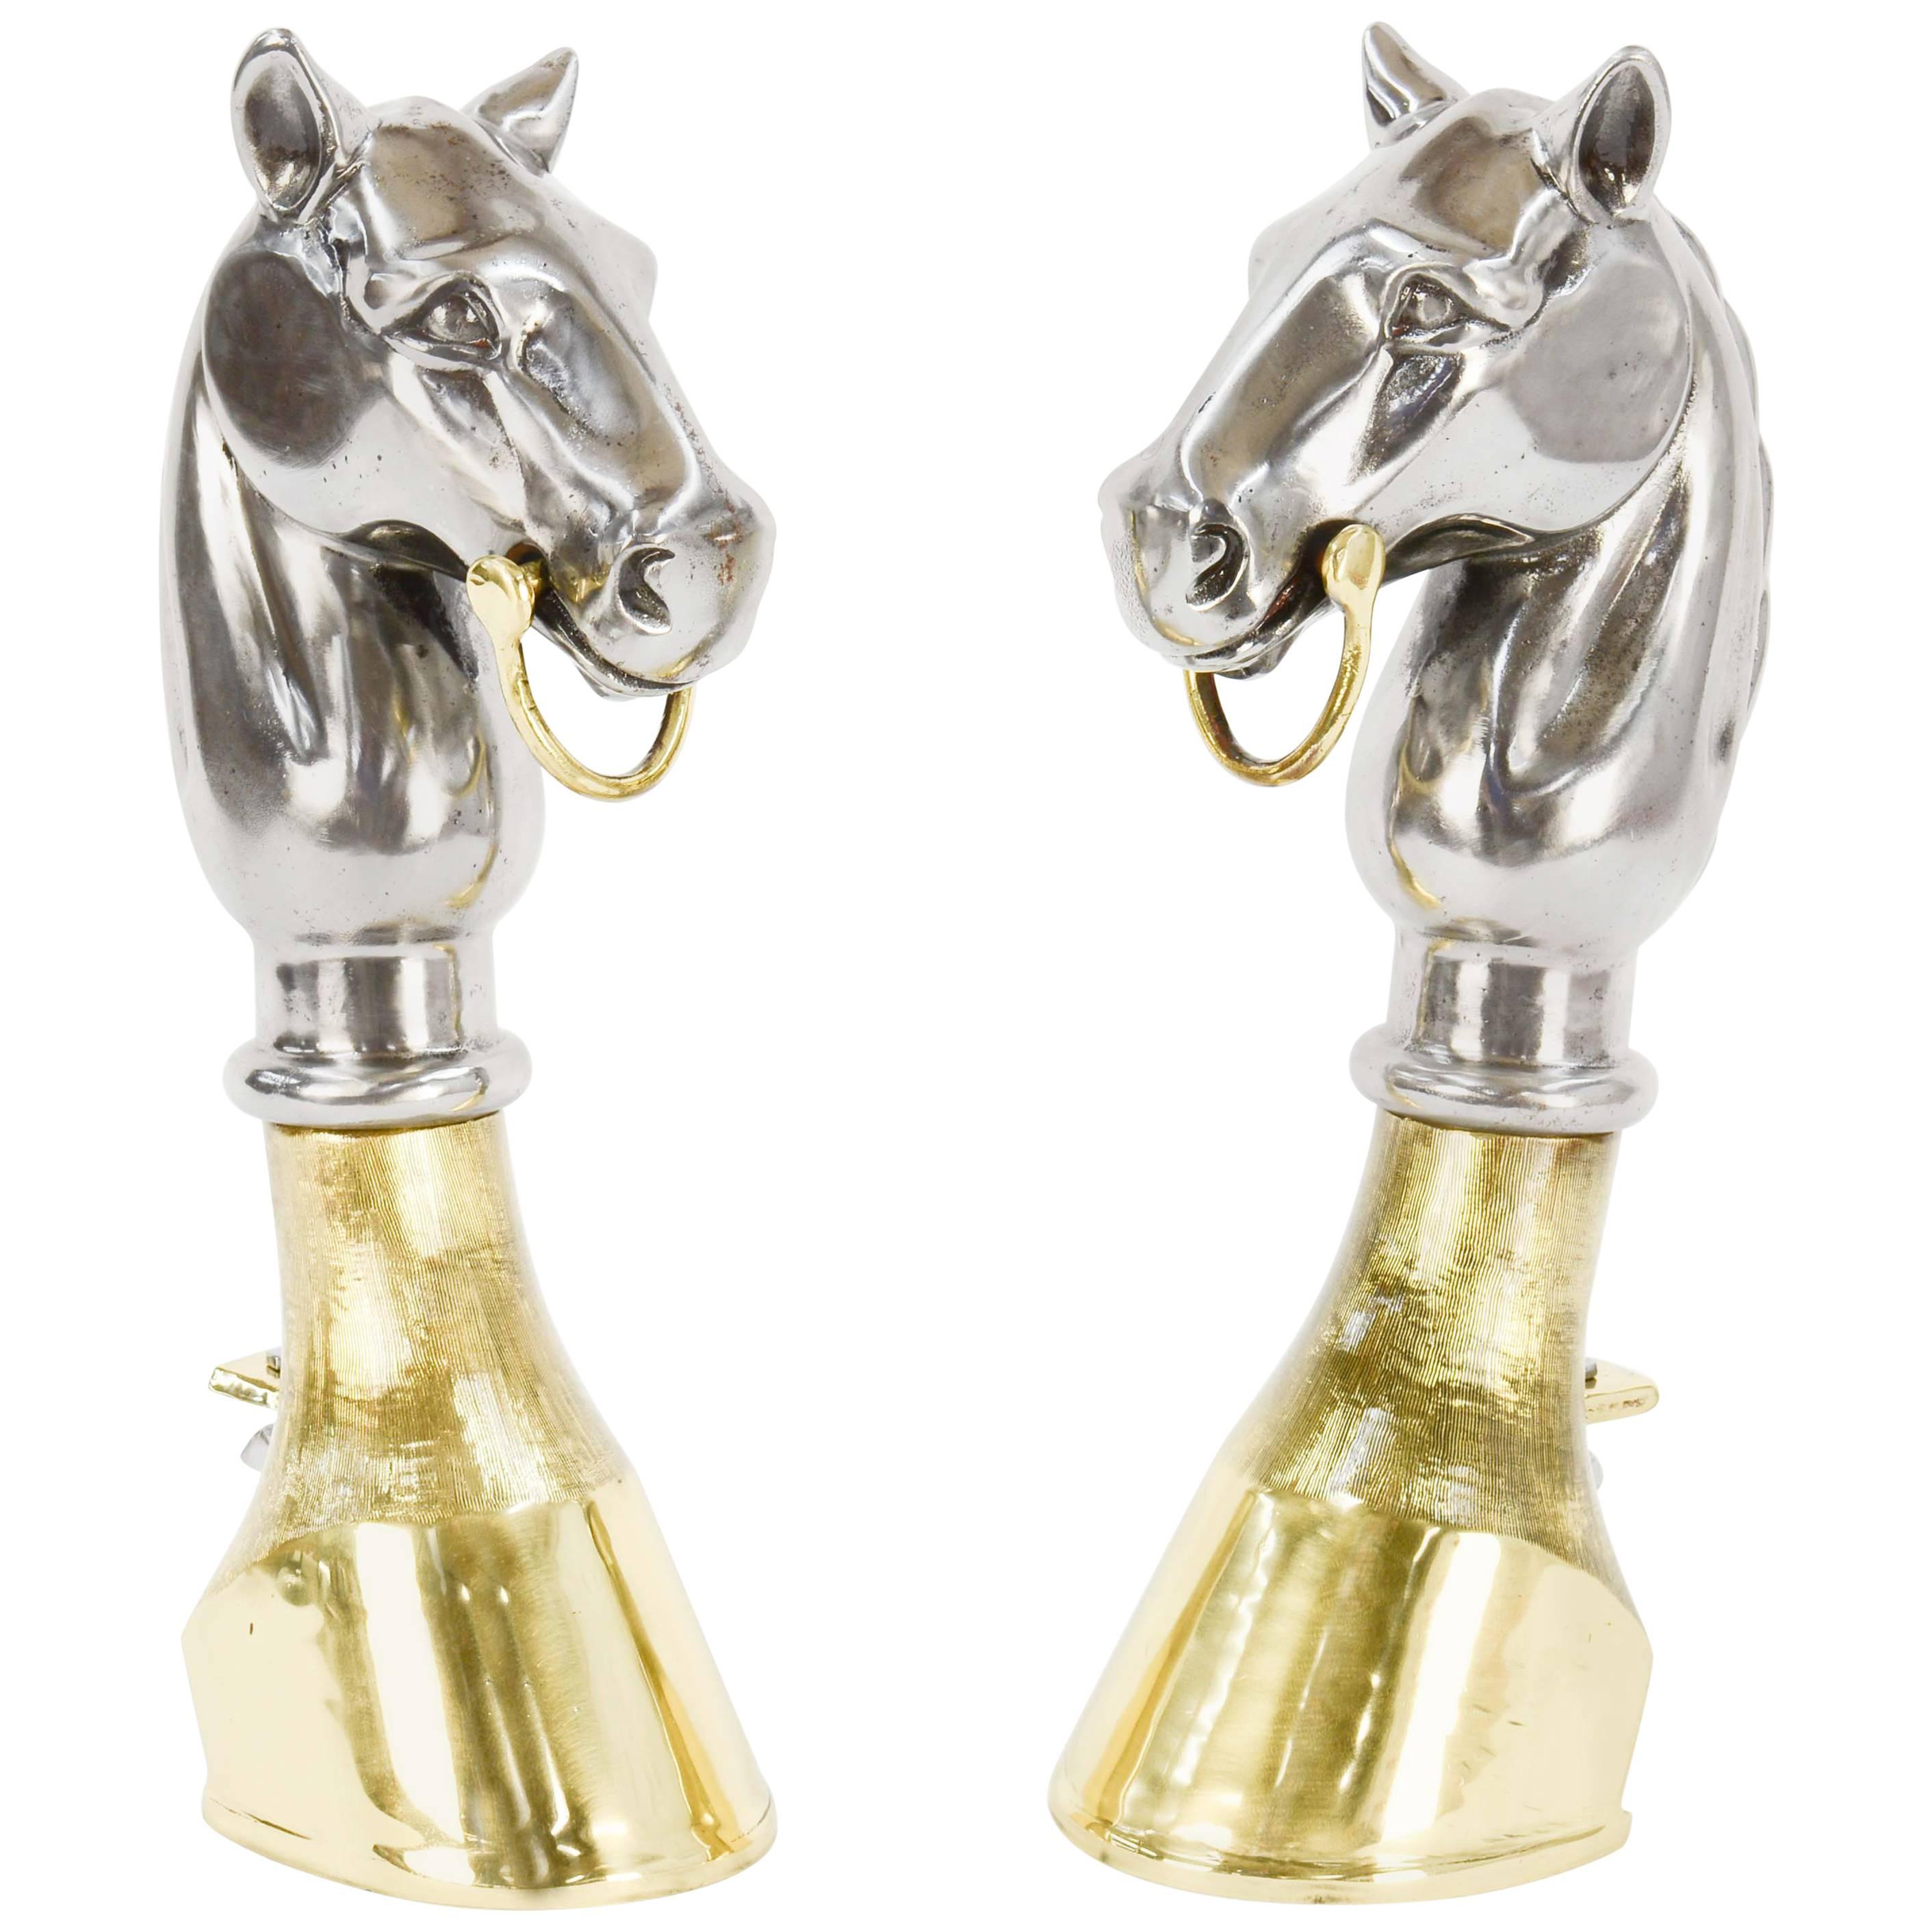 Pair of Polished Brass and Steel Equestrian Andiron Posts For Sale